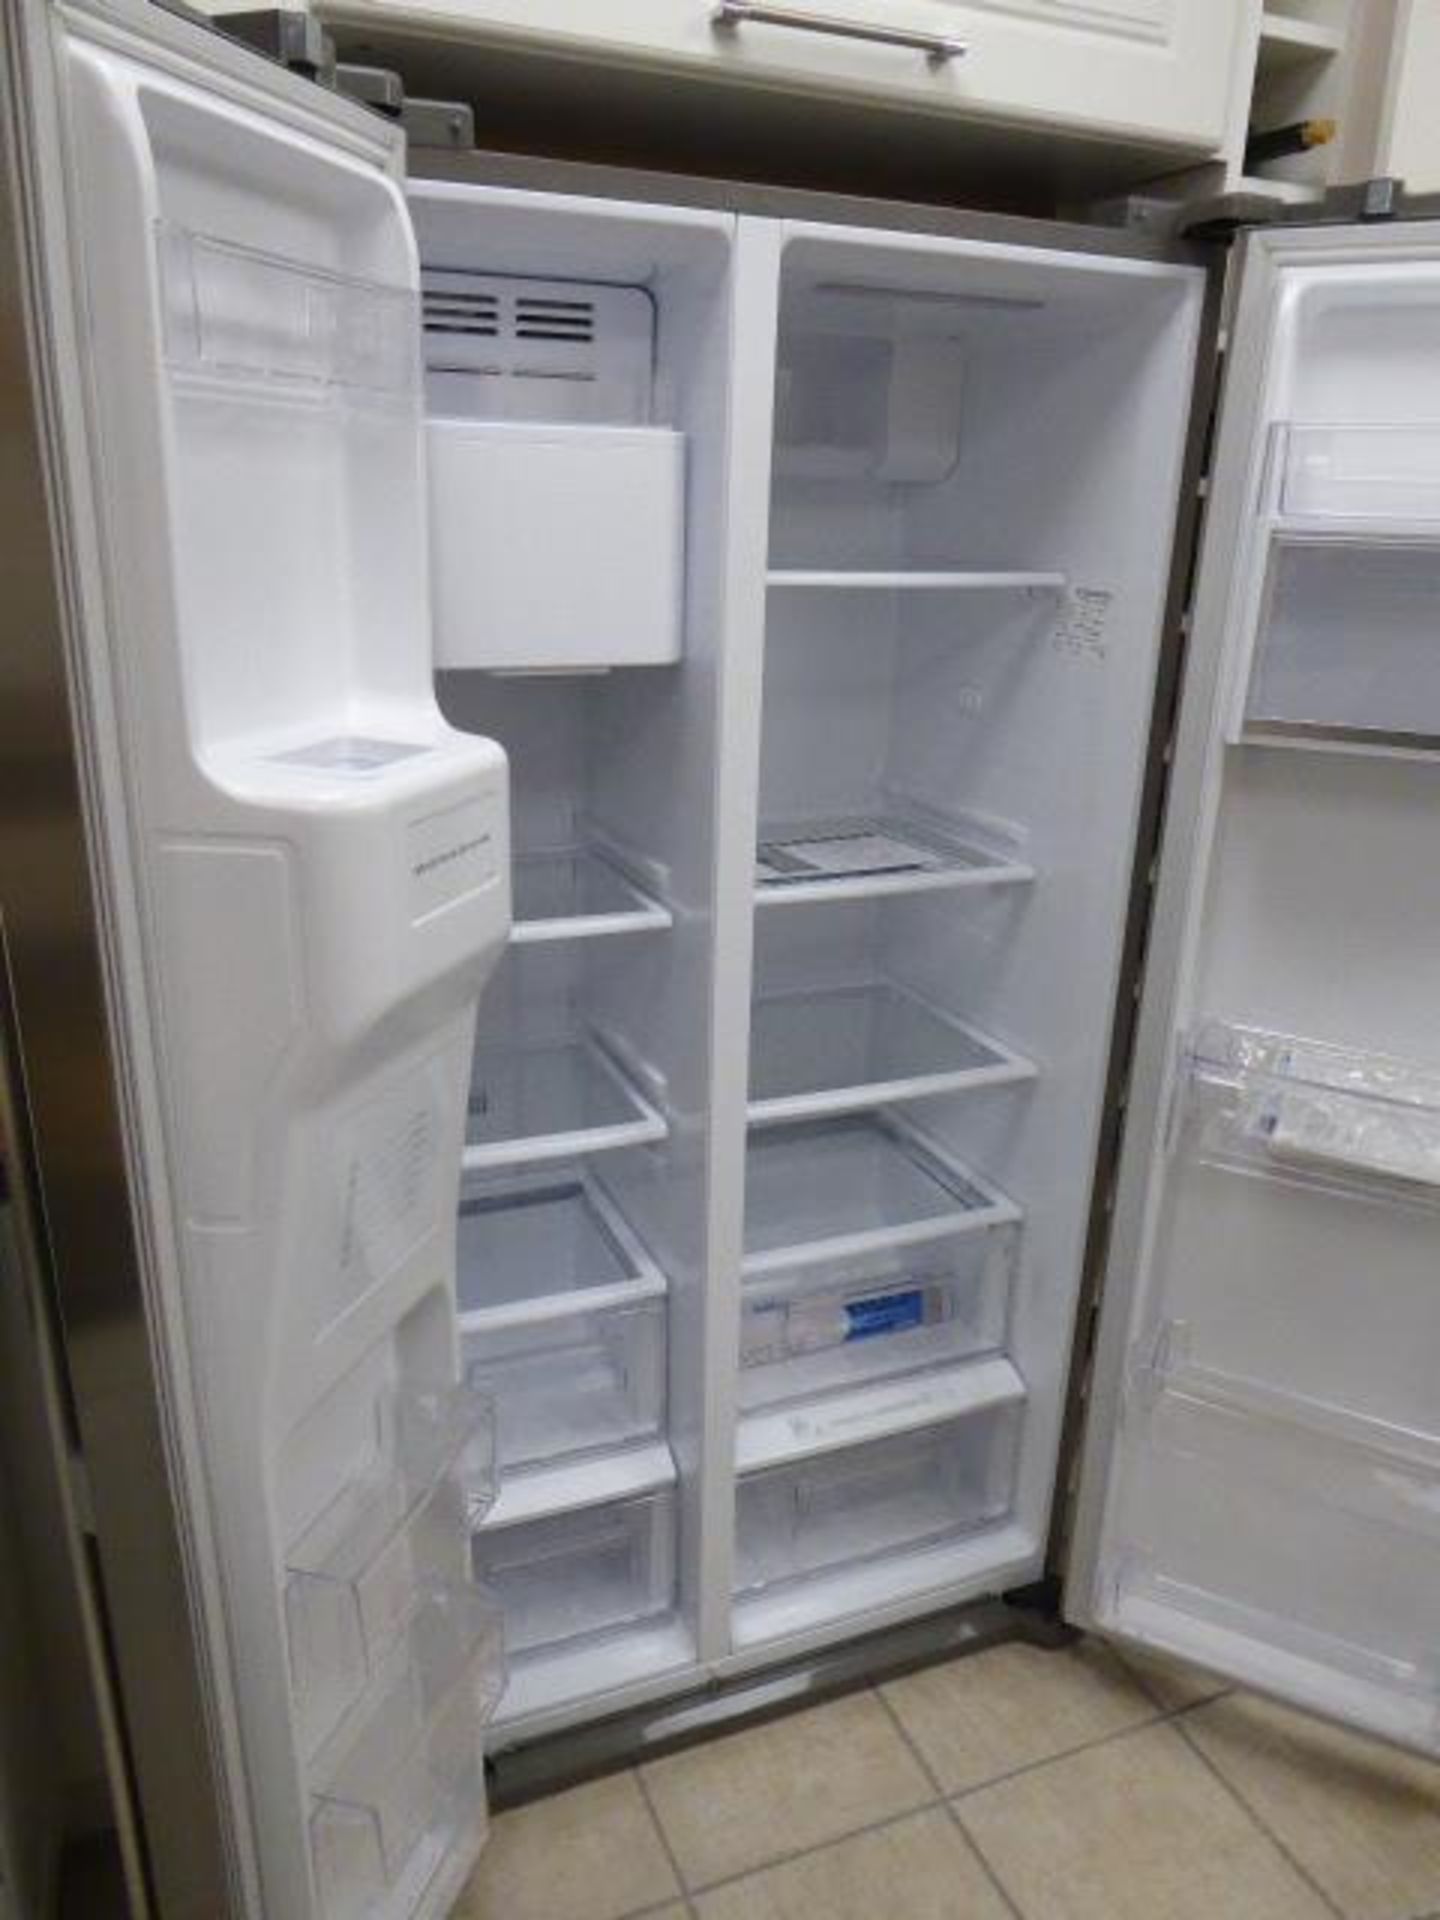 Electrolux ELA614WOX free standing American style fridge freezer (Located at the Lincoln saleroom) - Image 2 of 4